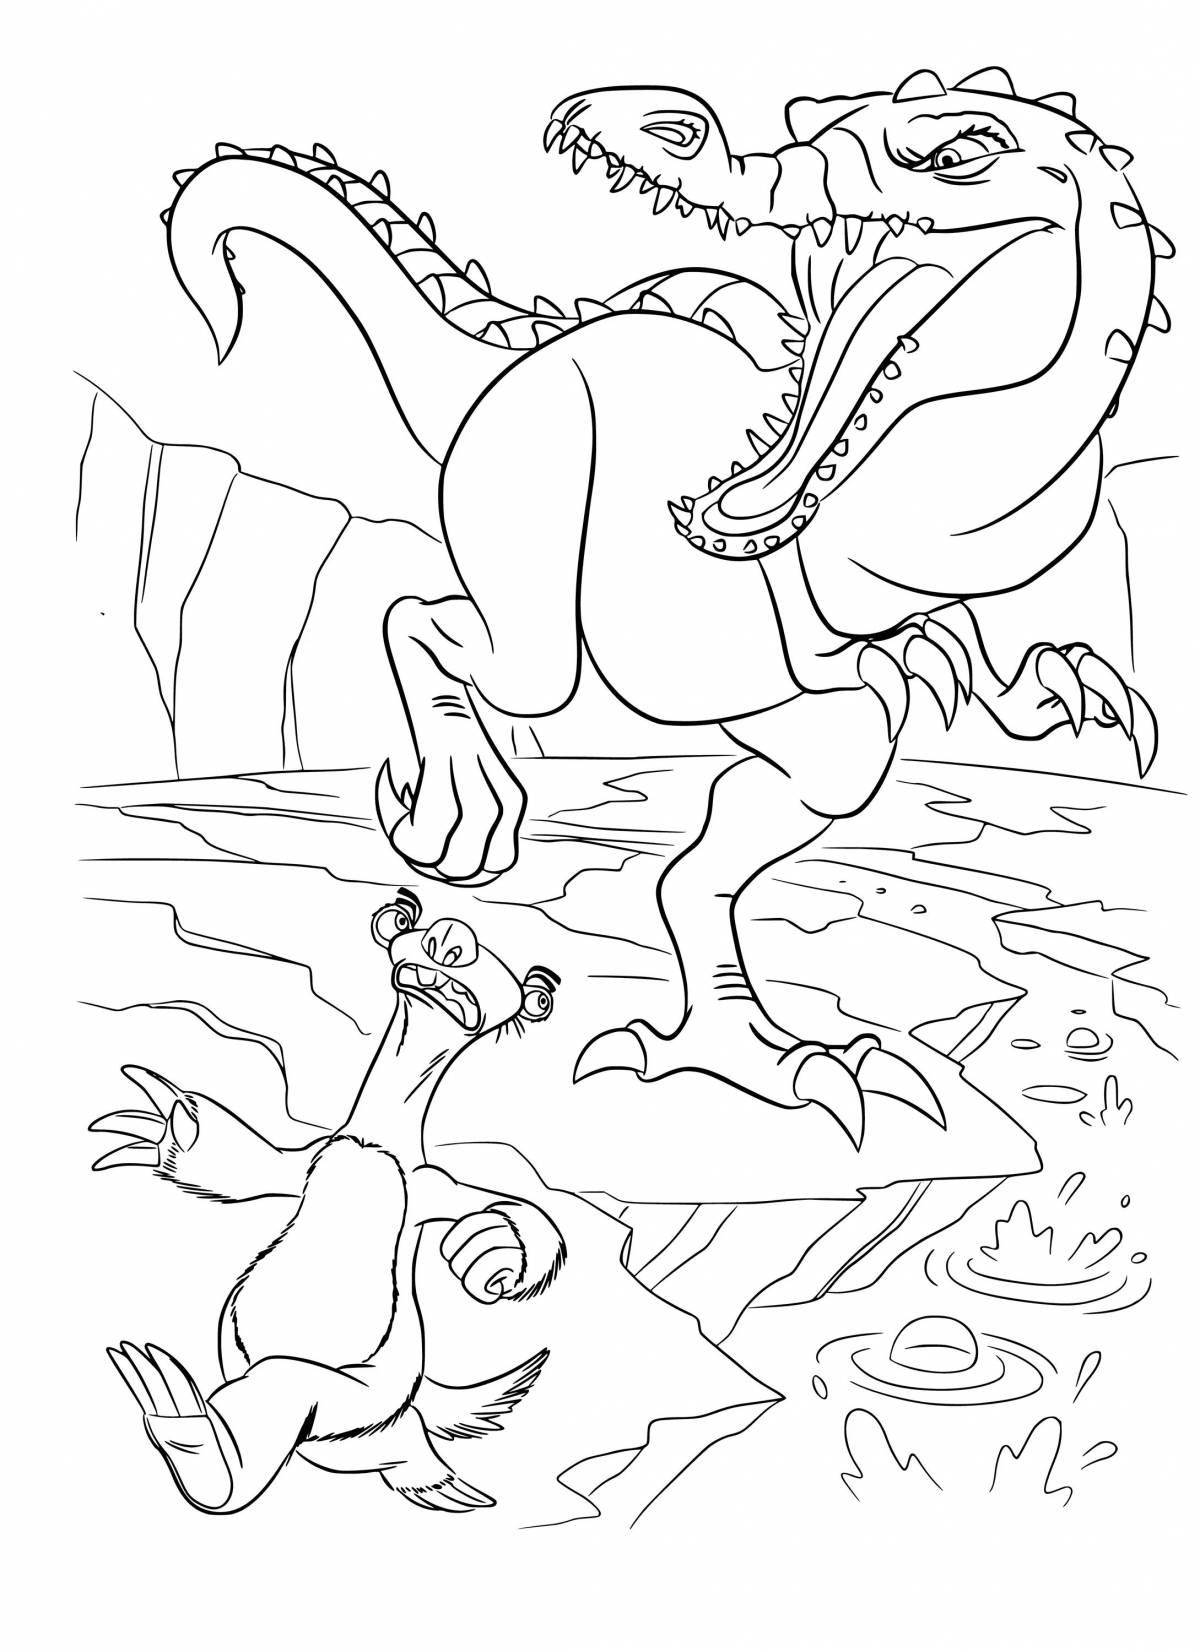 Ice age 3 coloring page